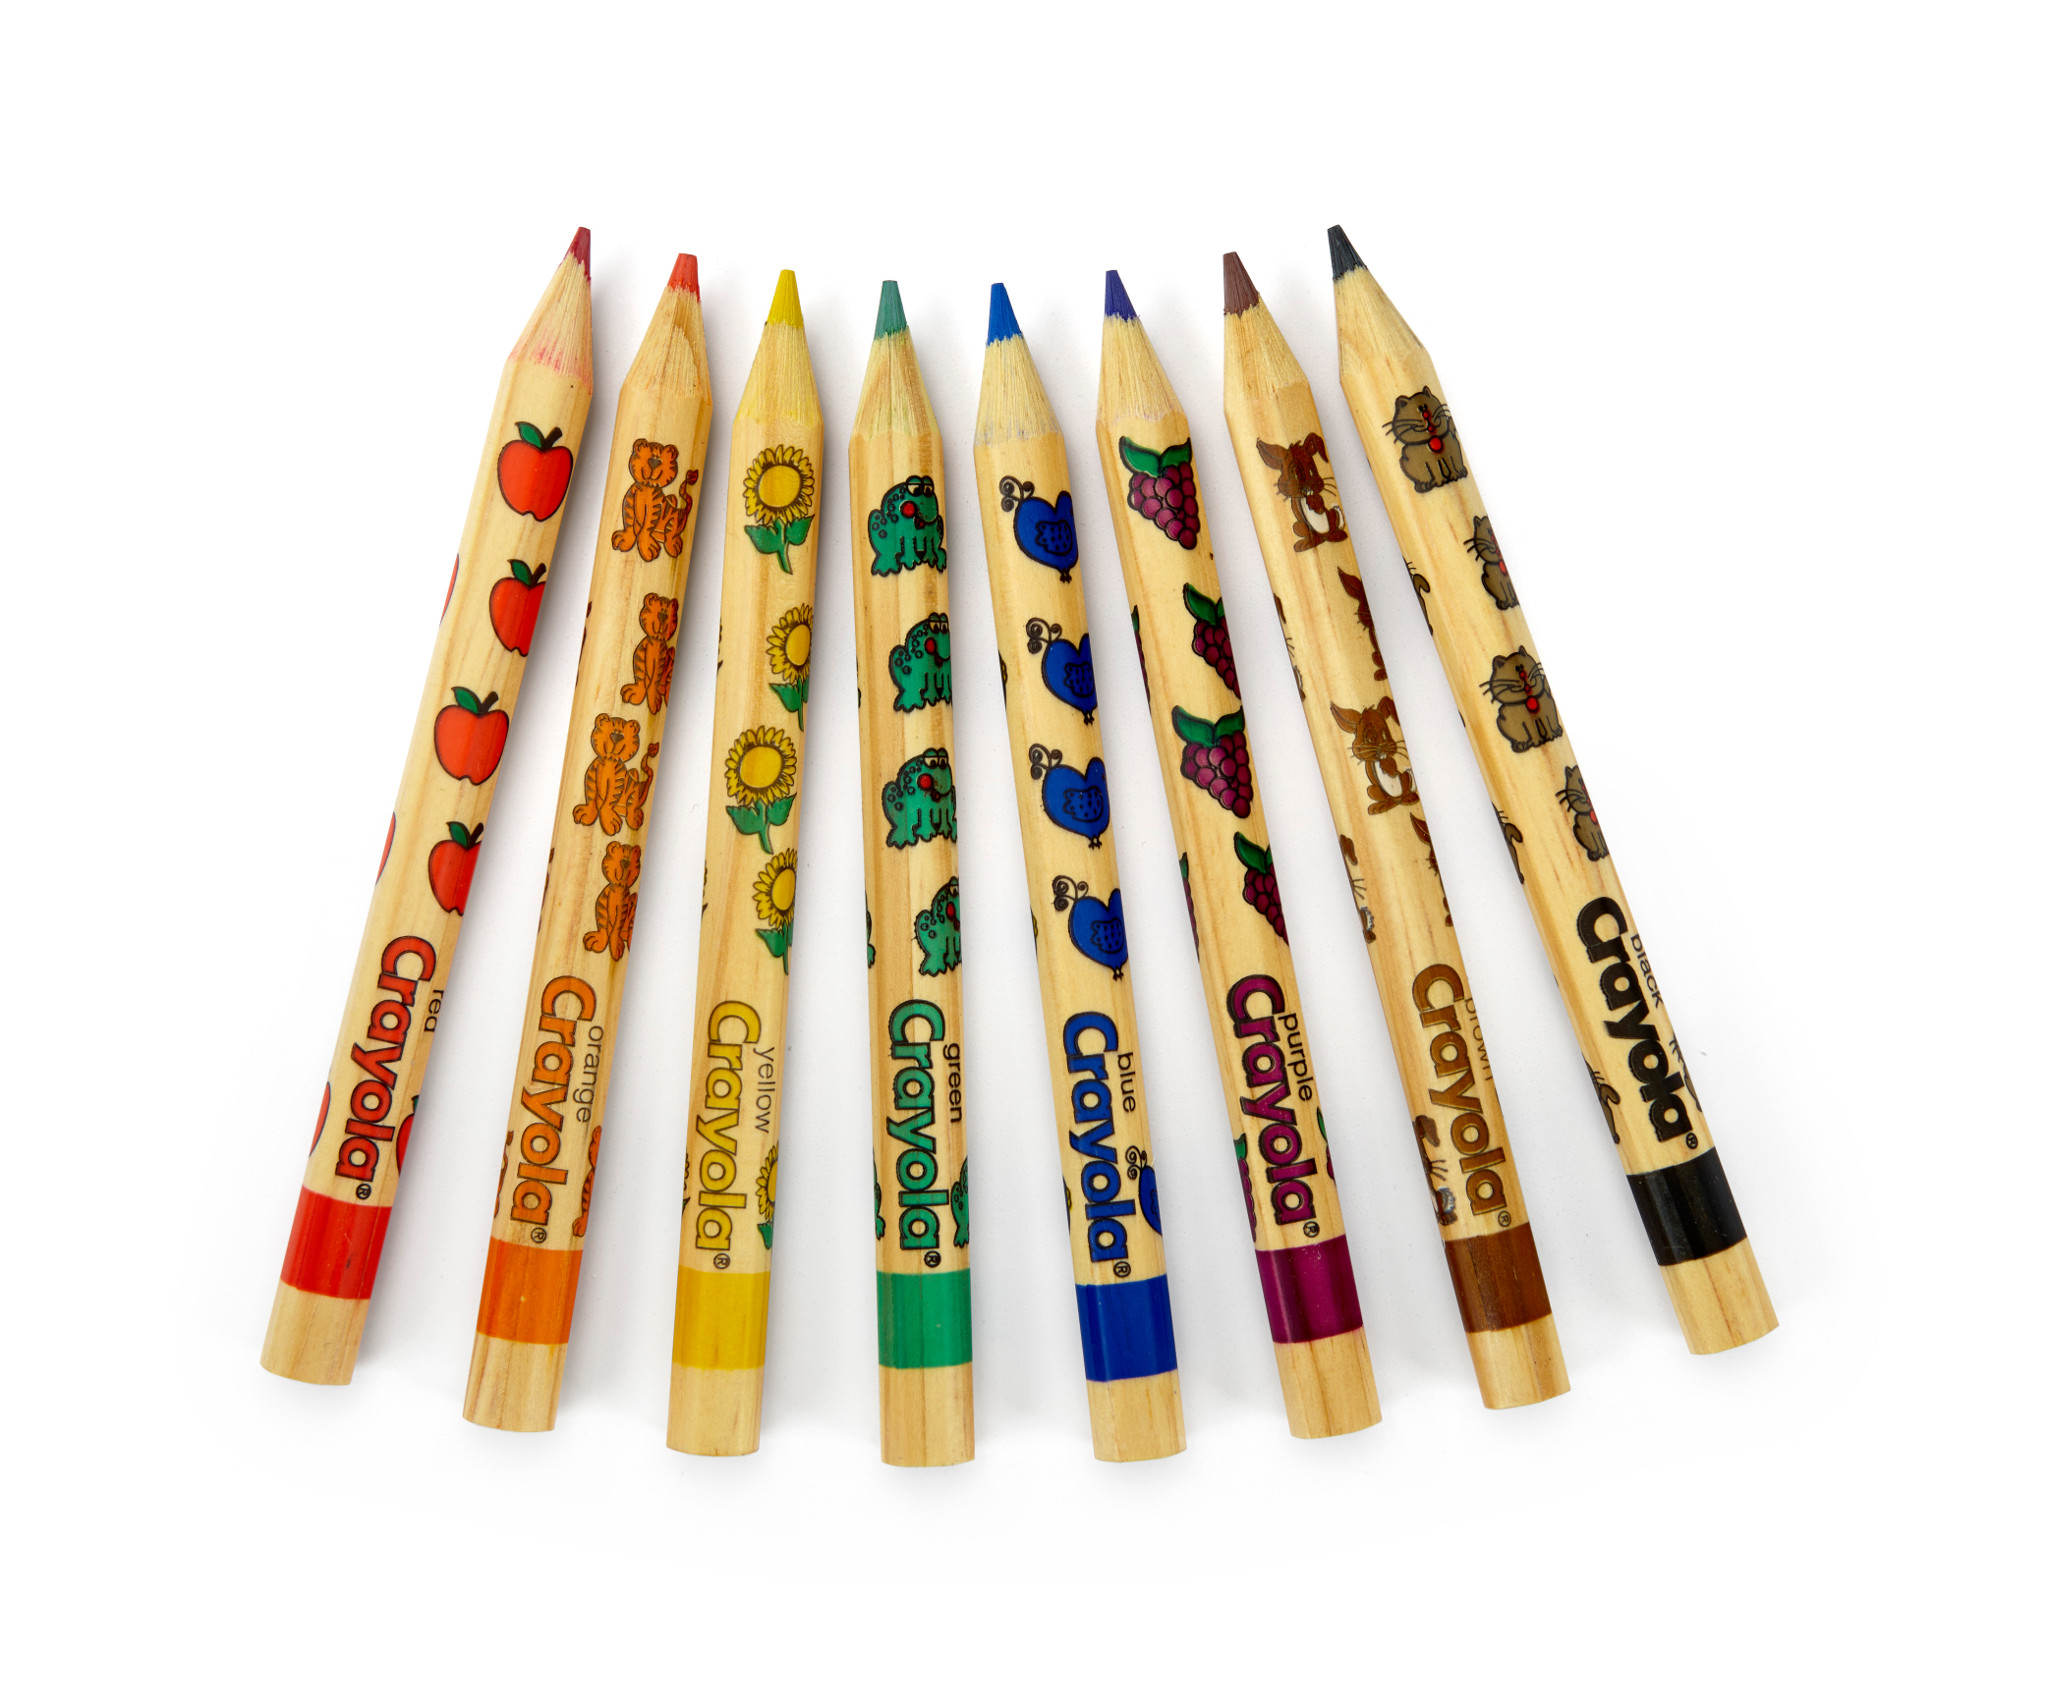 Crayola Write Start Hexagonal Colored Pencils, Extra Thick Tips